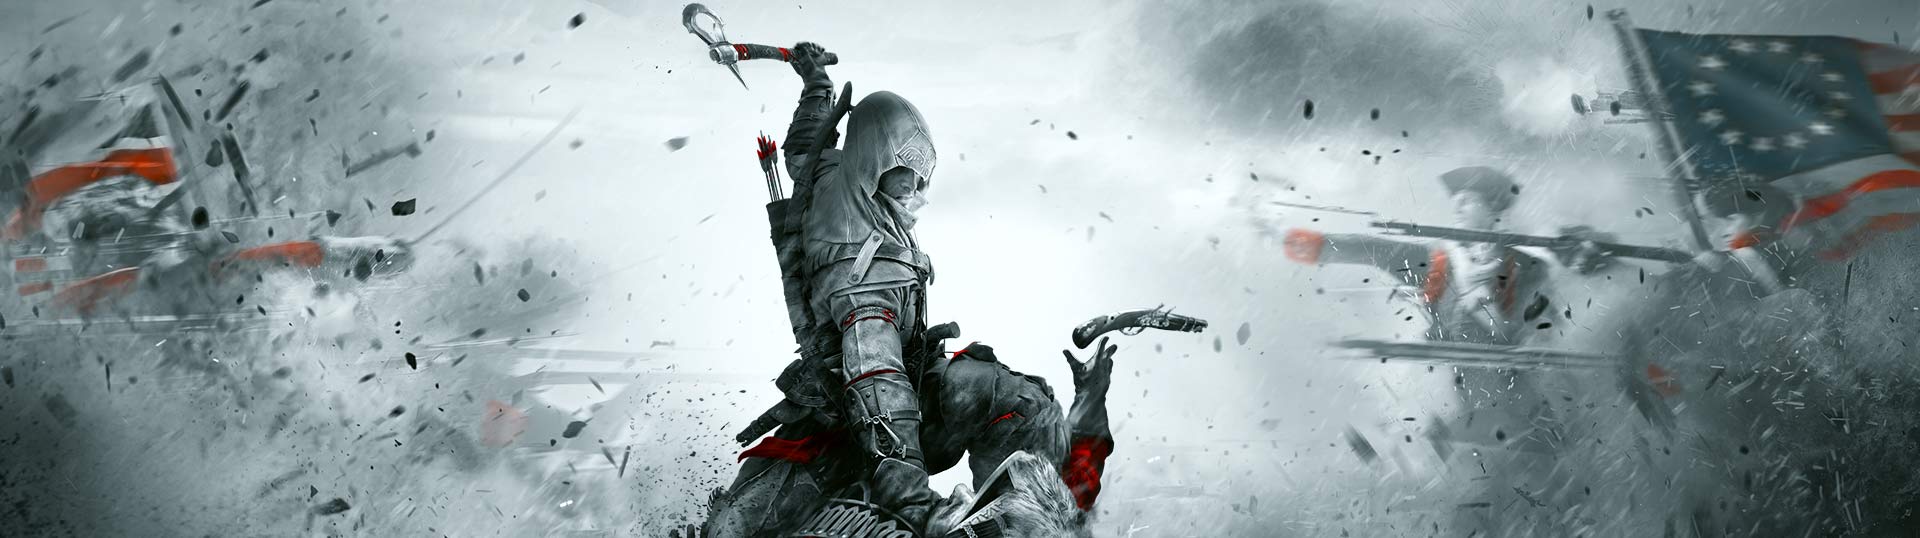 Buy Assassin's Creed III Remastered Edition for PS4, Xbox One, Nintendo  Switch and PC